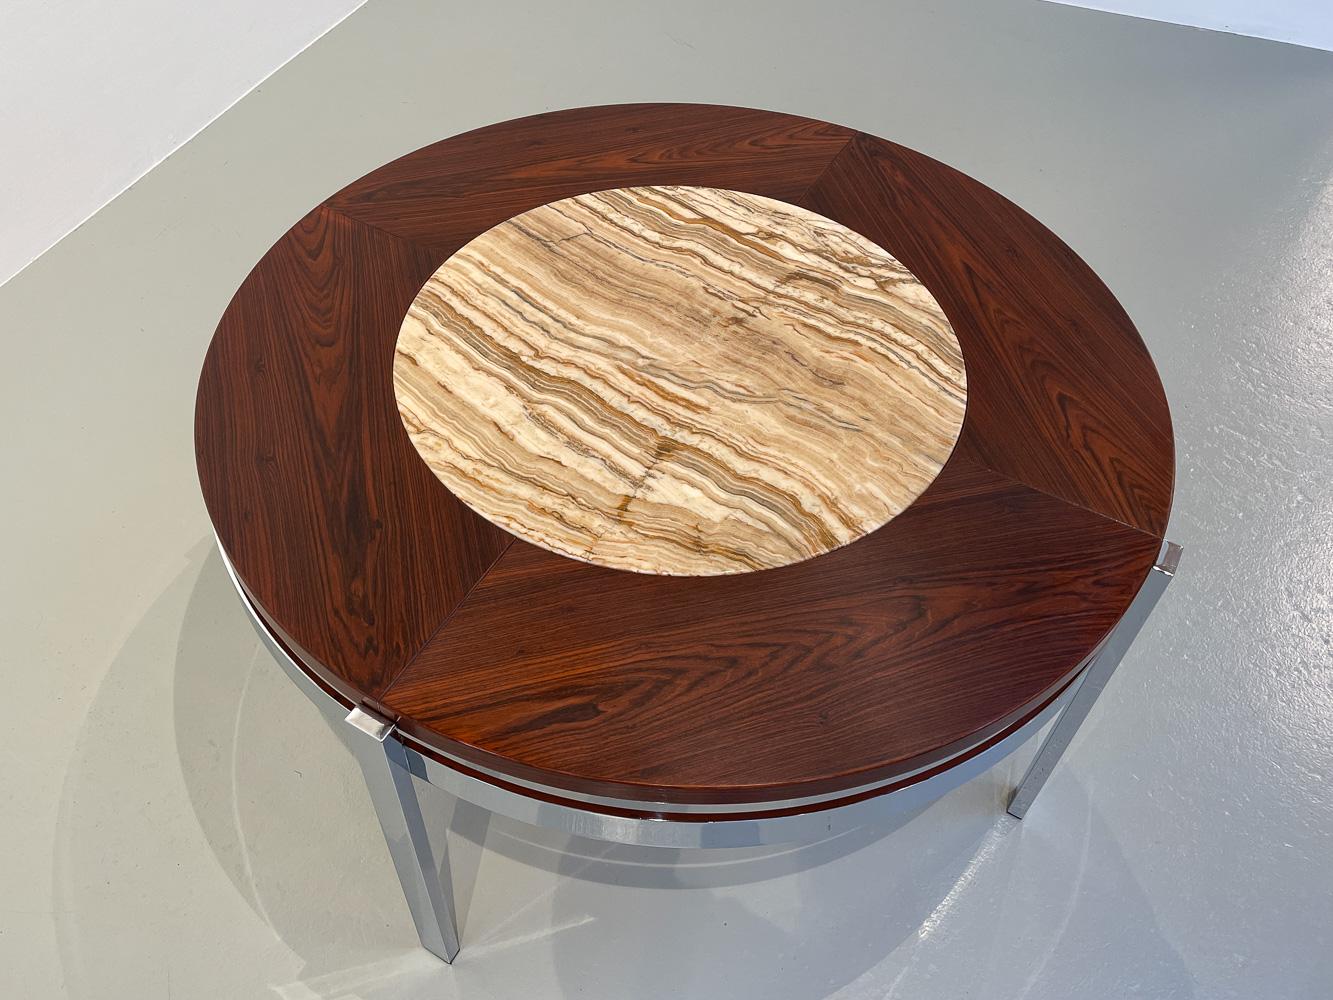 Danish Modern Round Rosewood and Marble Coffee Table by Bendixen Design, 1970s. For Sale 5